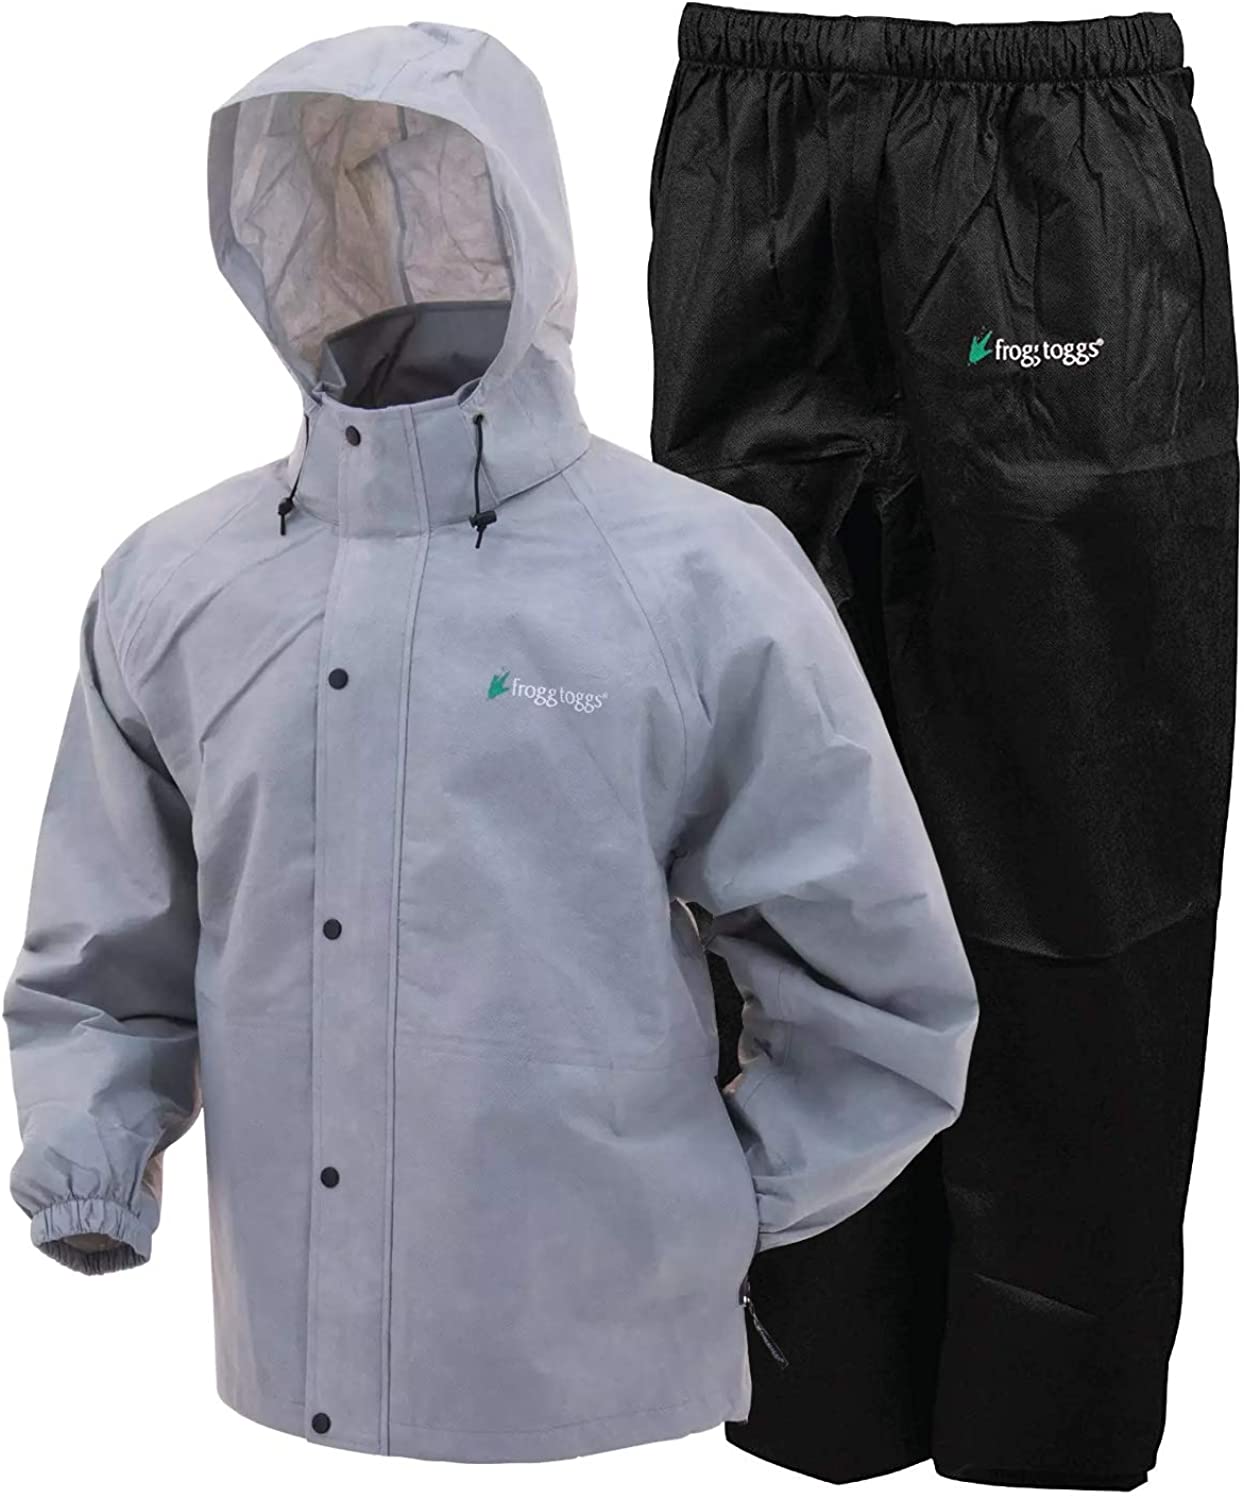 FROGG TOGGS mens Classic All-sport Waterproof Breathable Rain Suit | eBay